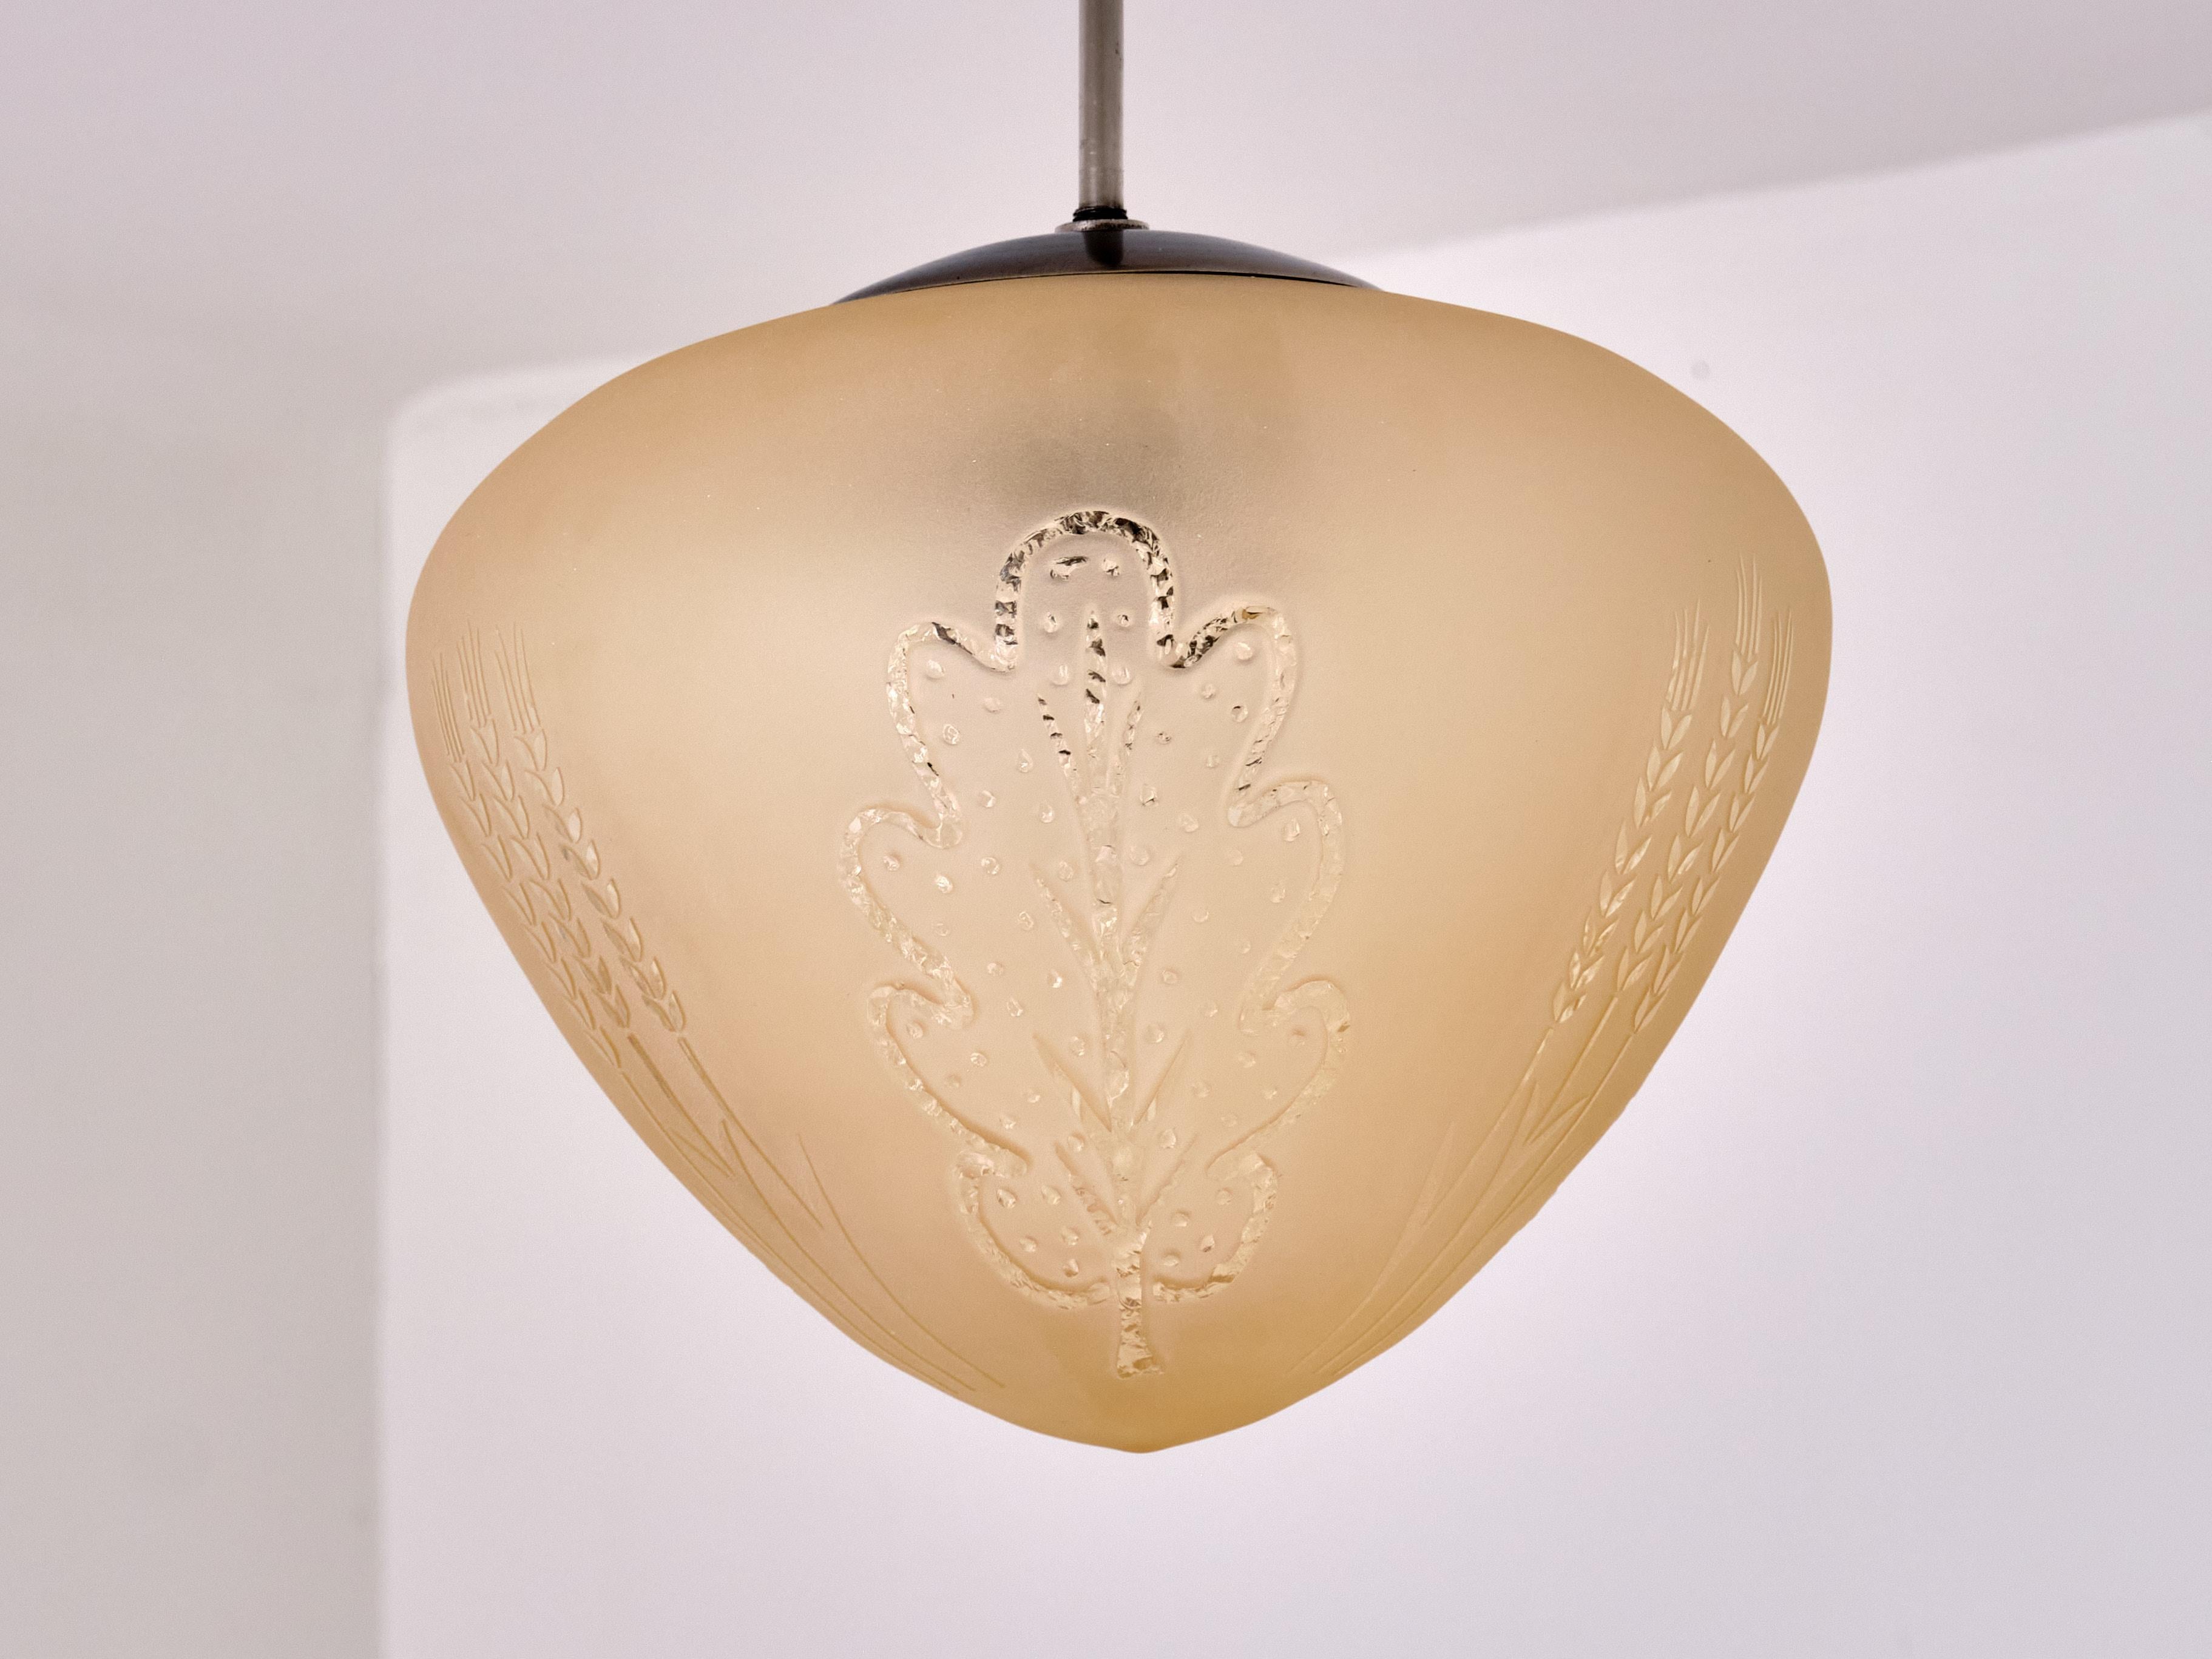 Swedish Edward Hald Attributed Pendant Lamp, Decorated Glass, Orrefors, Sweden, 1930s For Sale